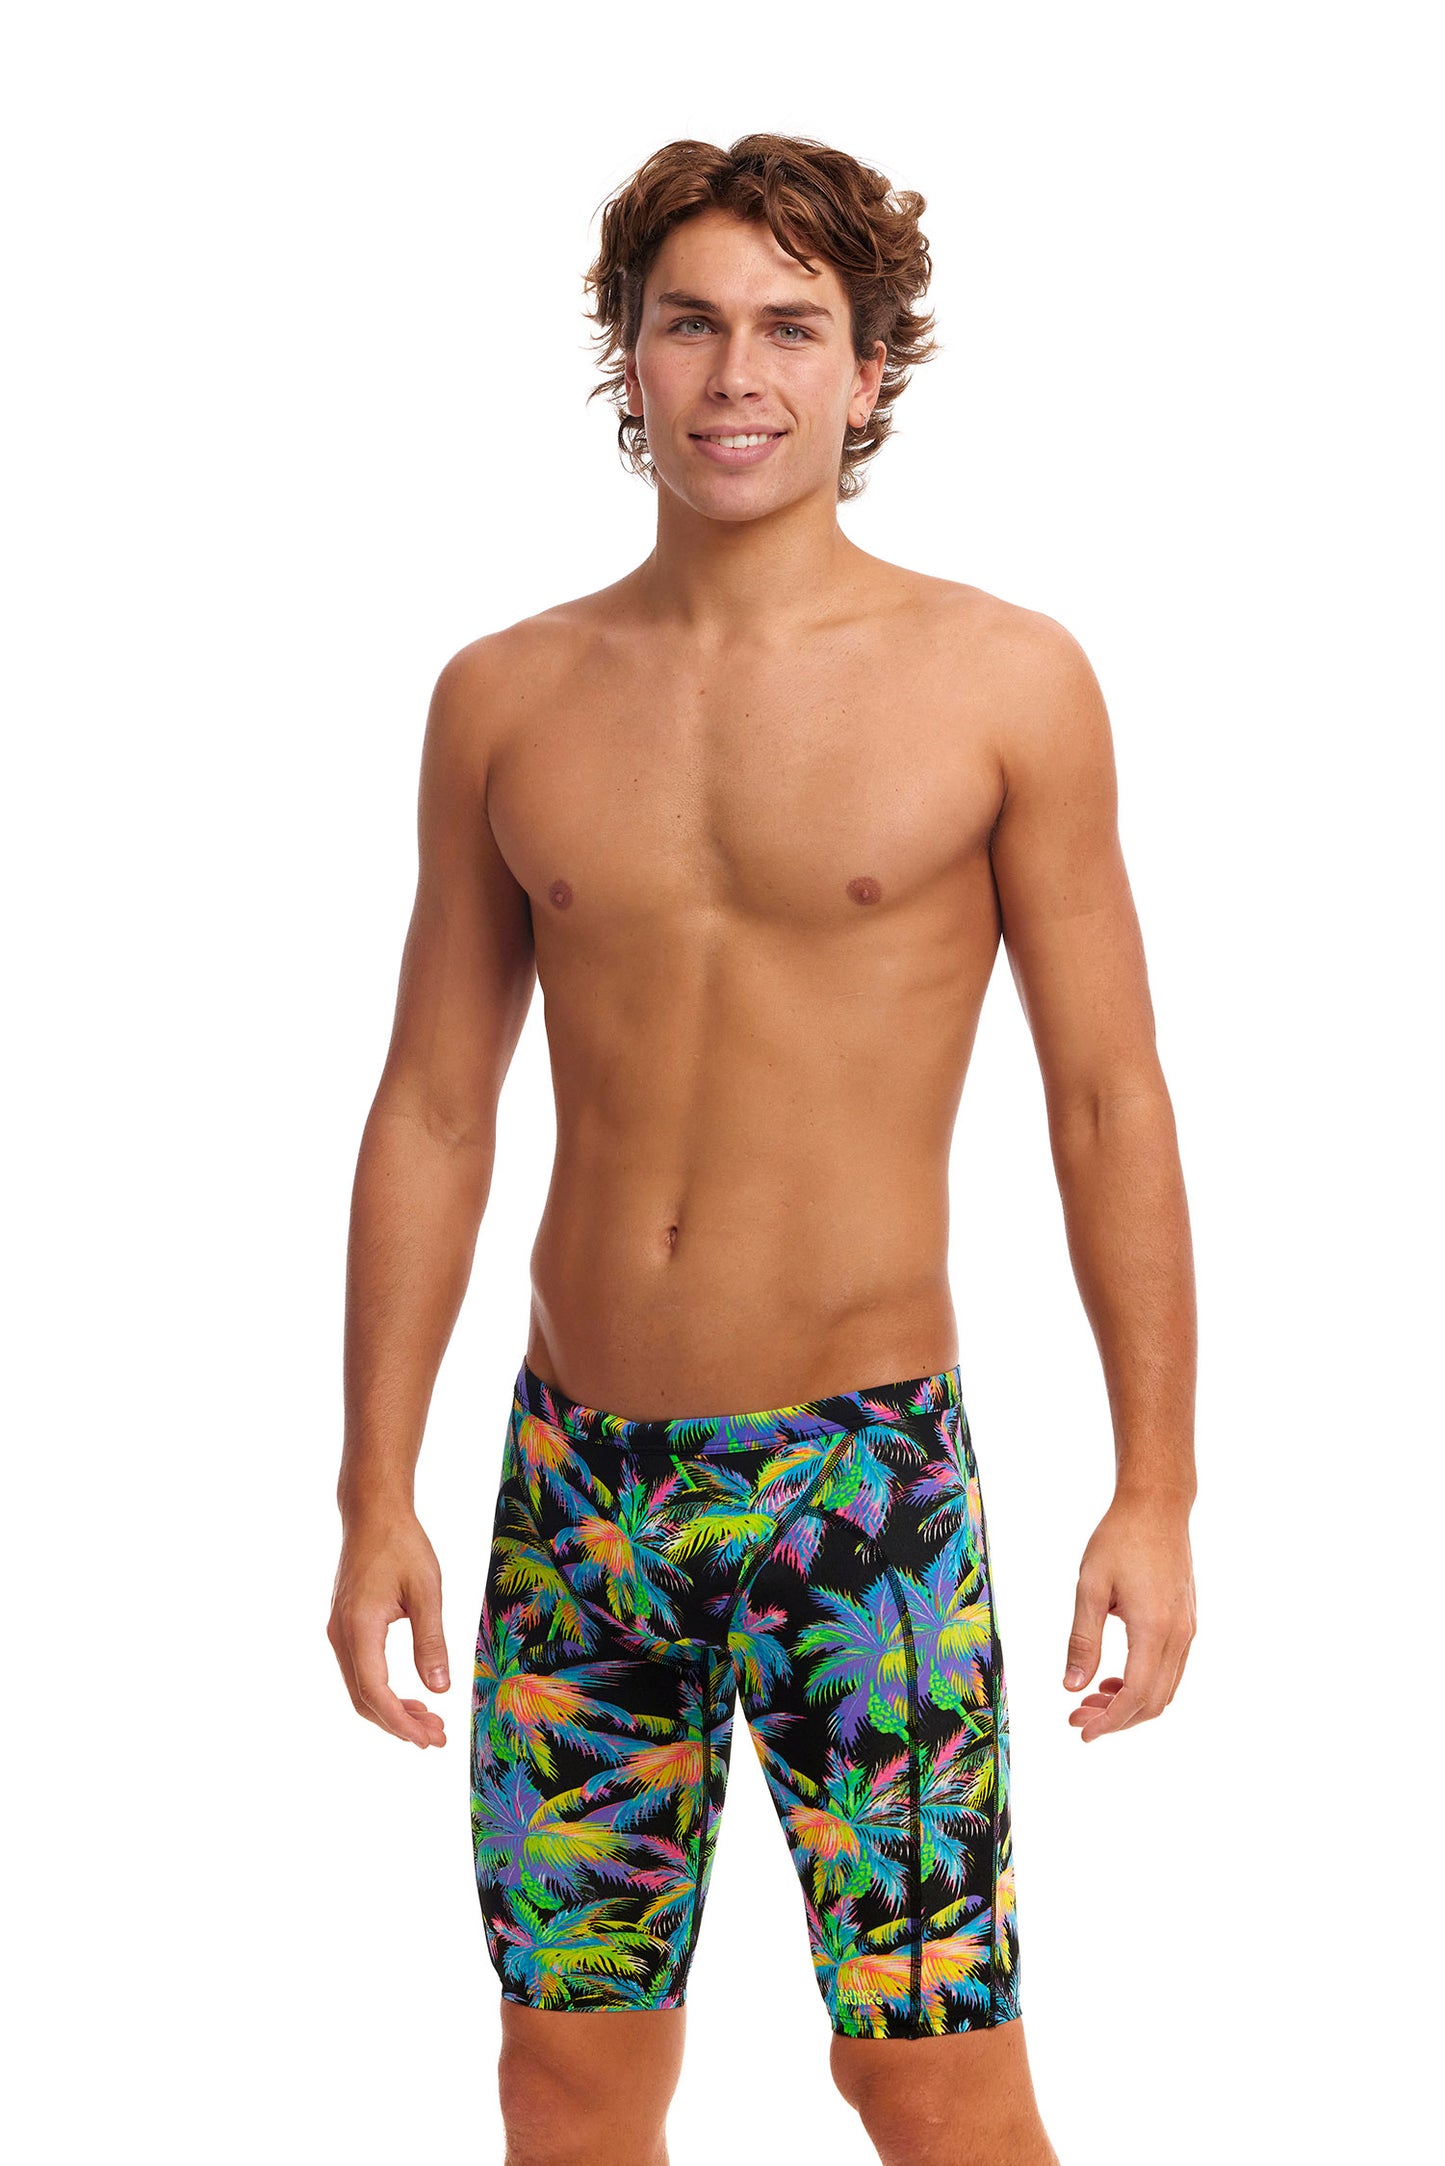 NEW! Funky Trunks Mens Eco Training Jammers Paradise Please